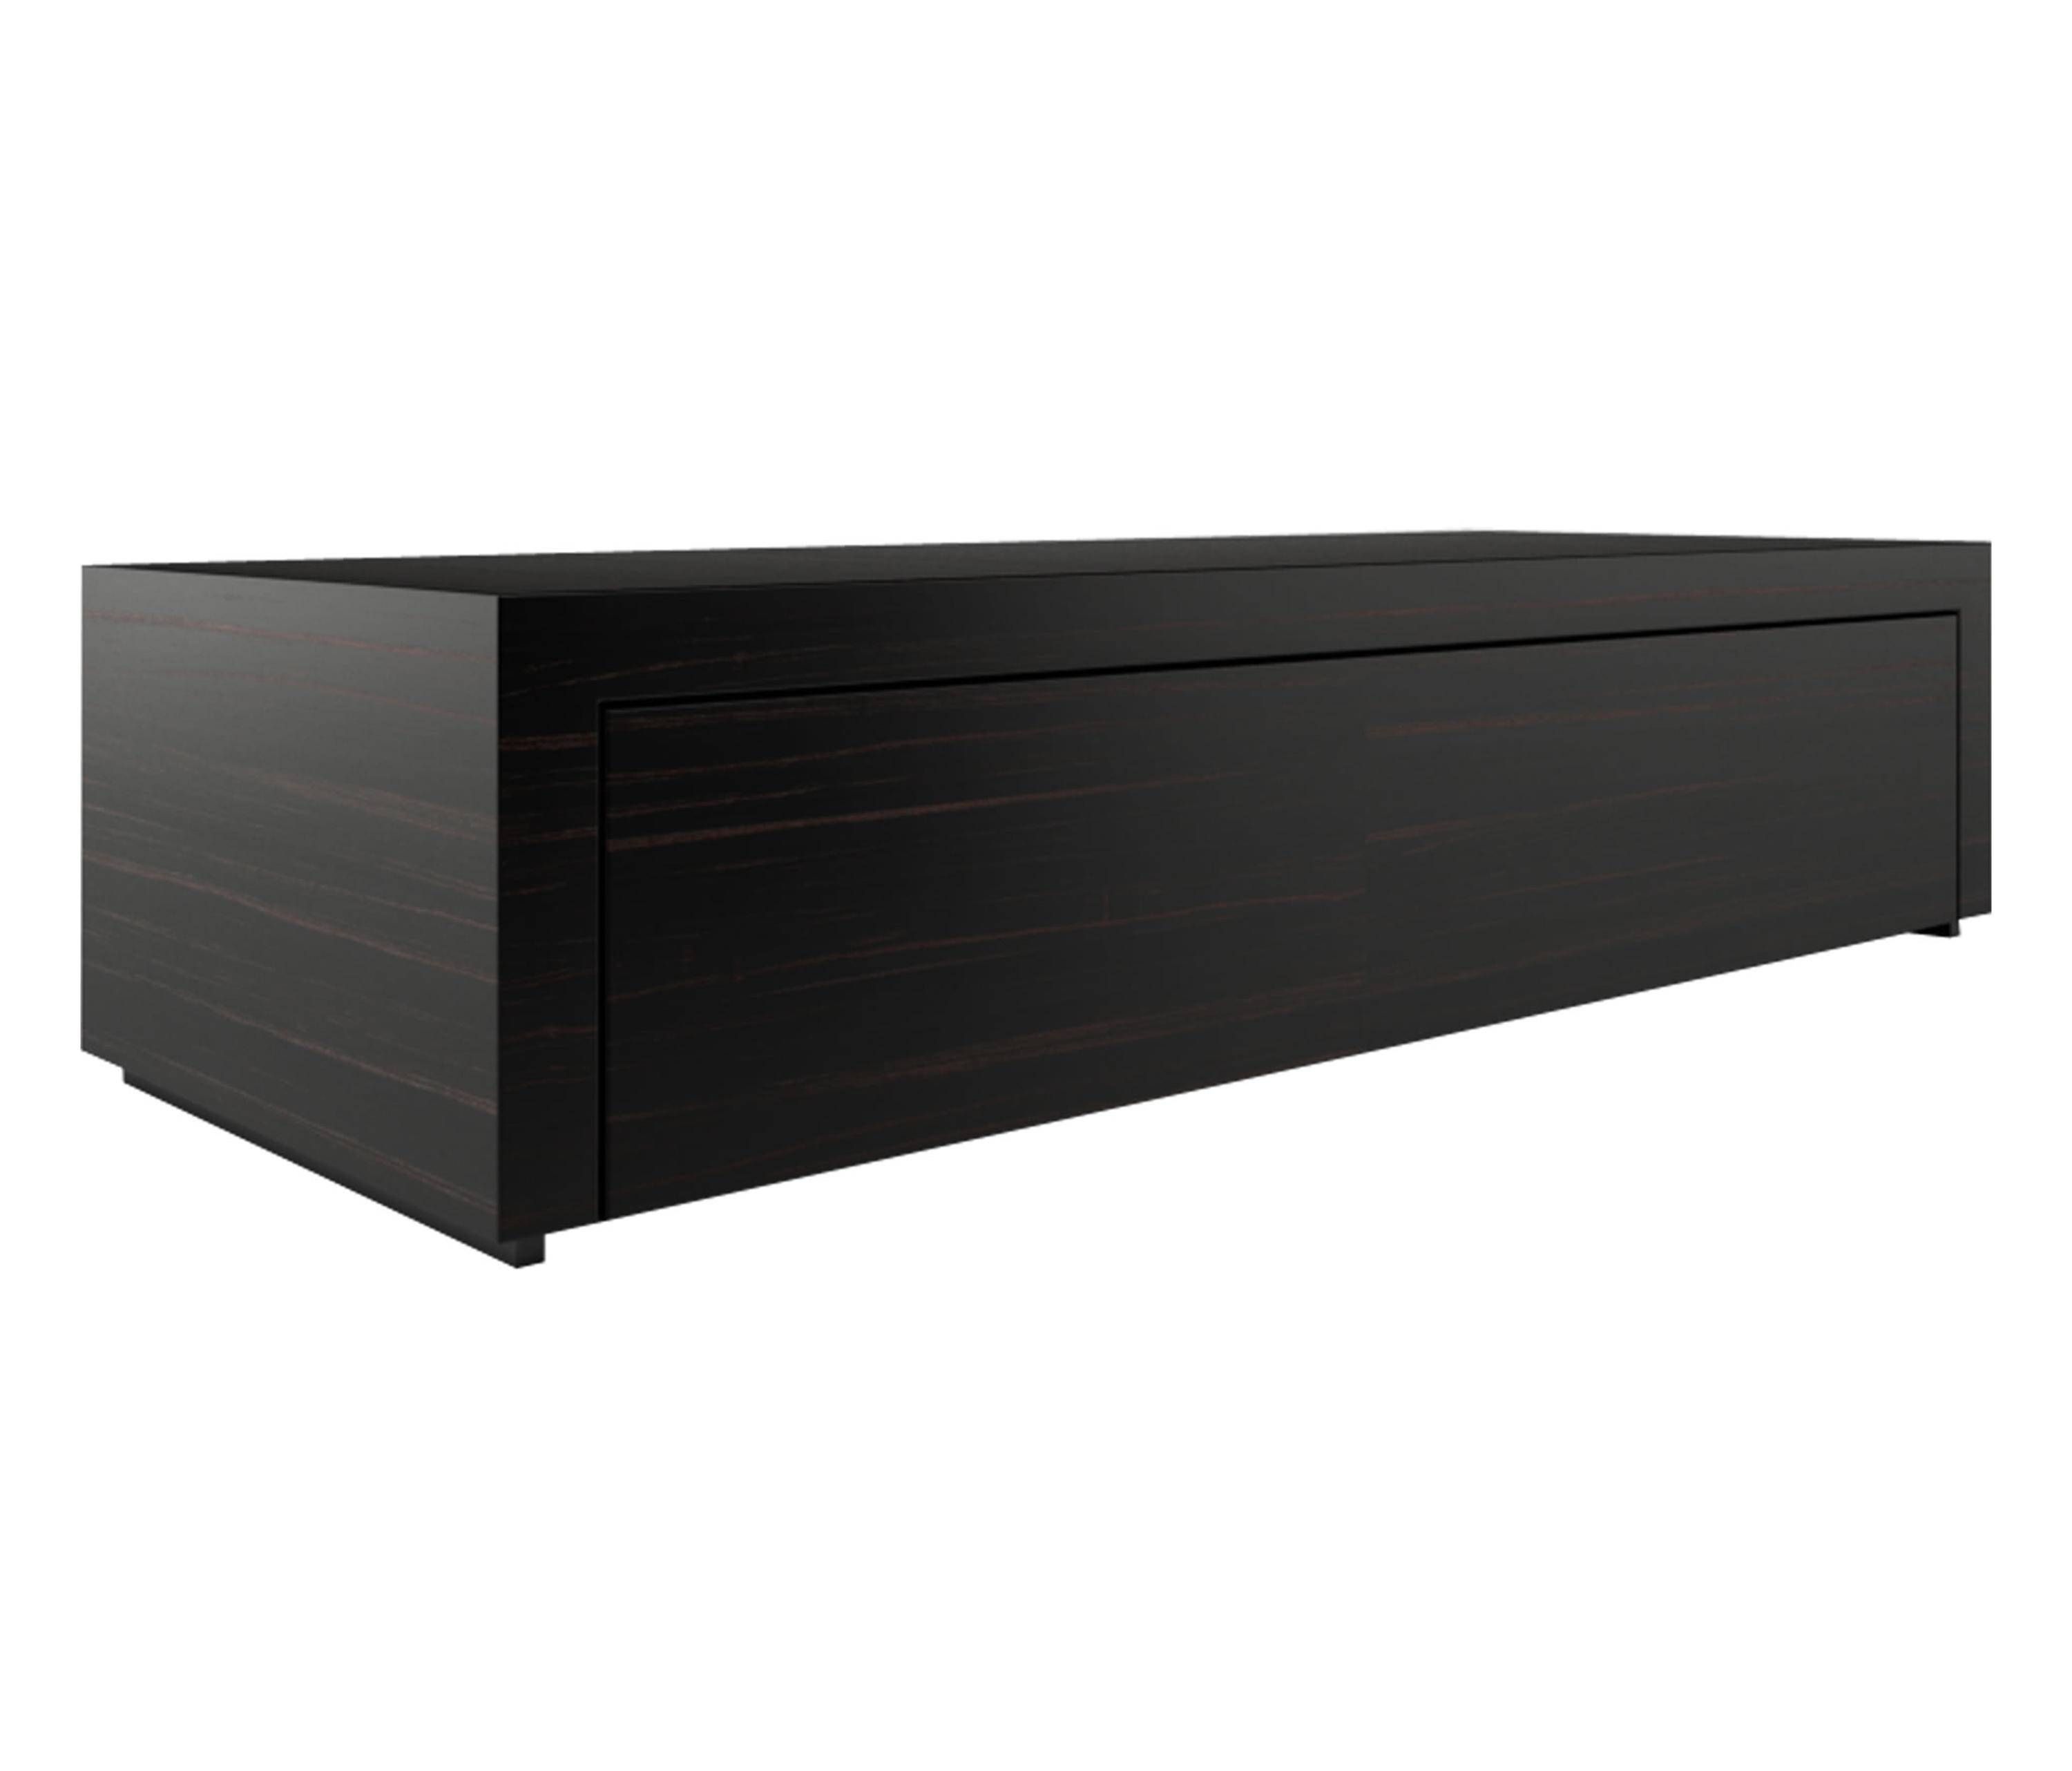 Repositio Tv/ Hifi Sideboard – Sideboards From Rechteck | Architonic Inside Sideboards Tv (View 12 of 15)